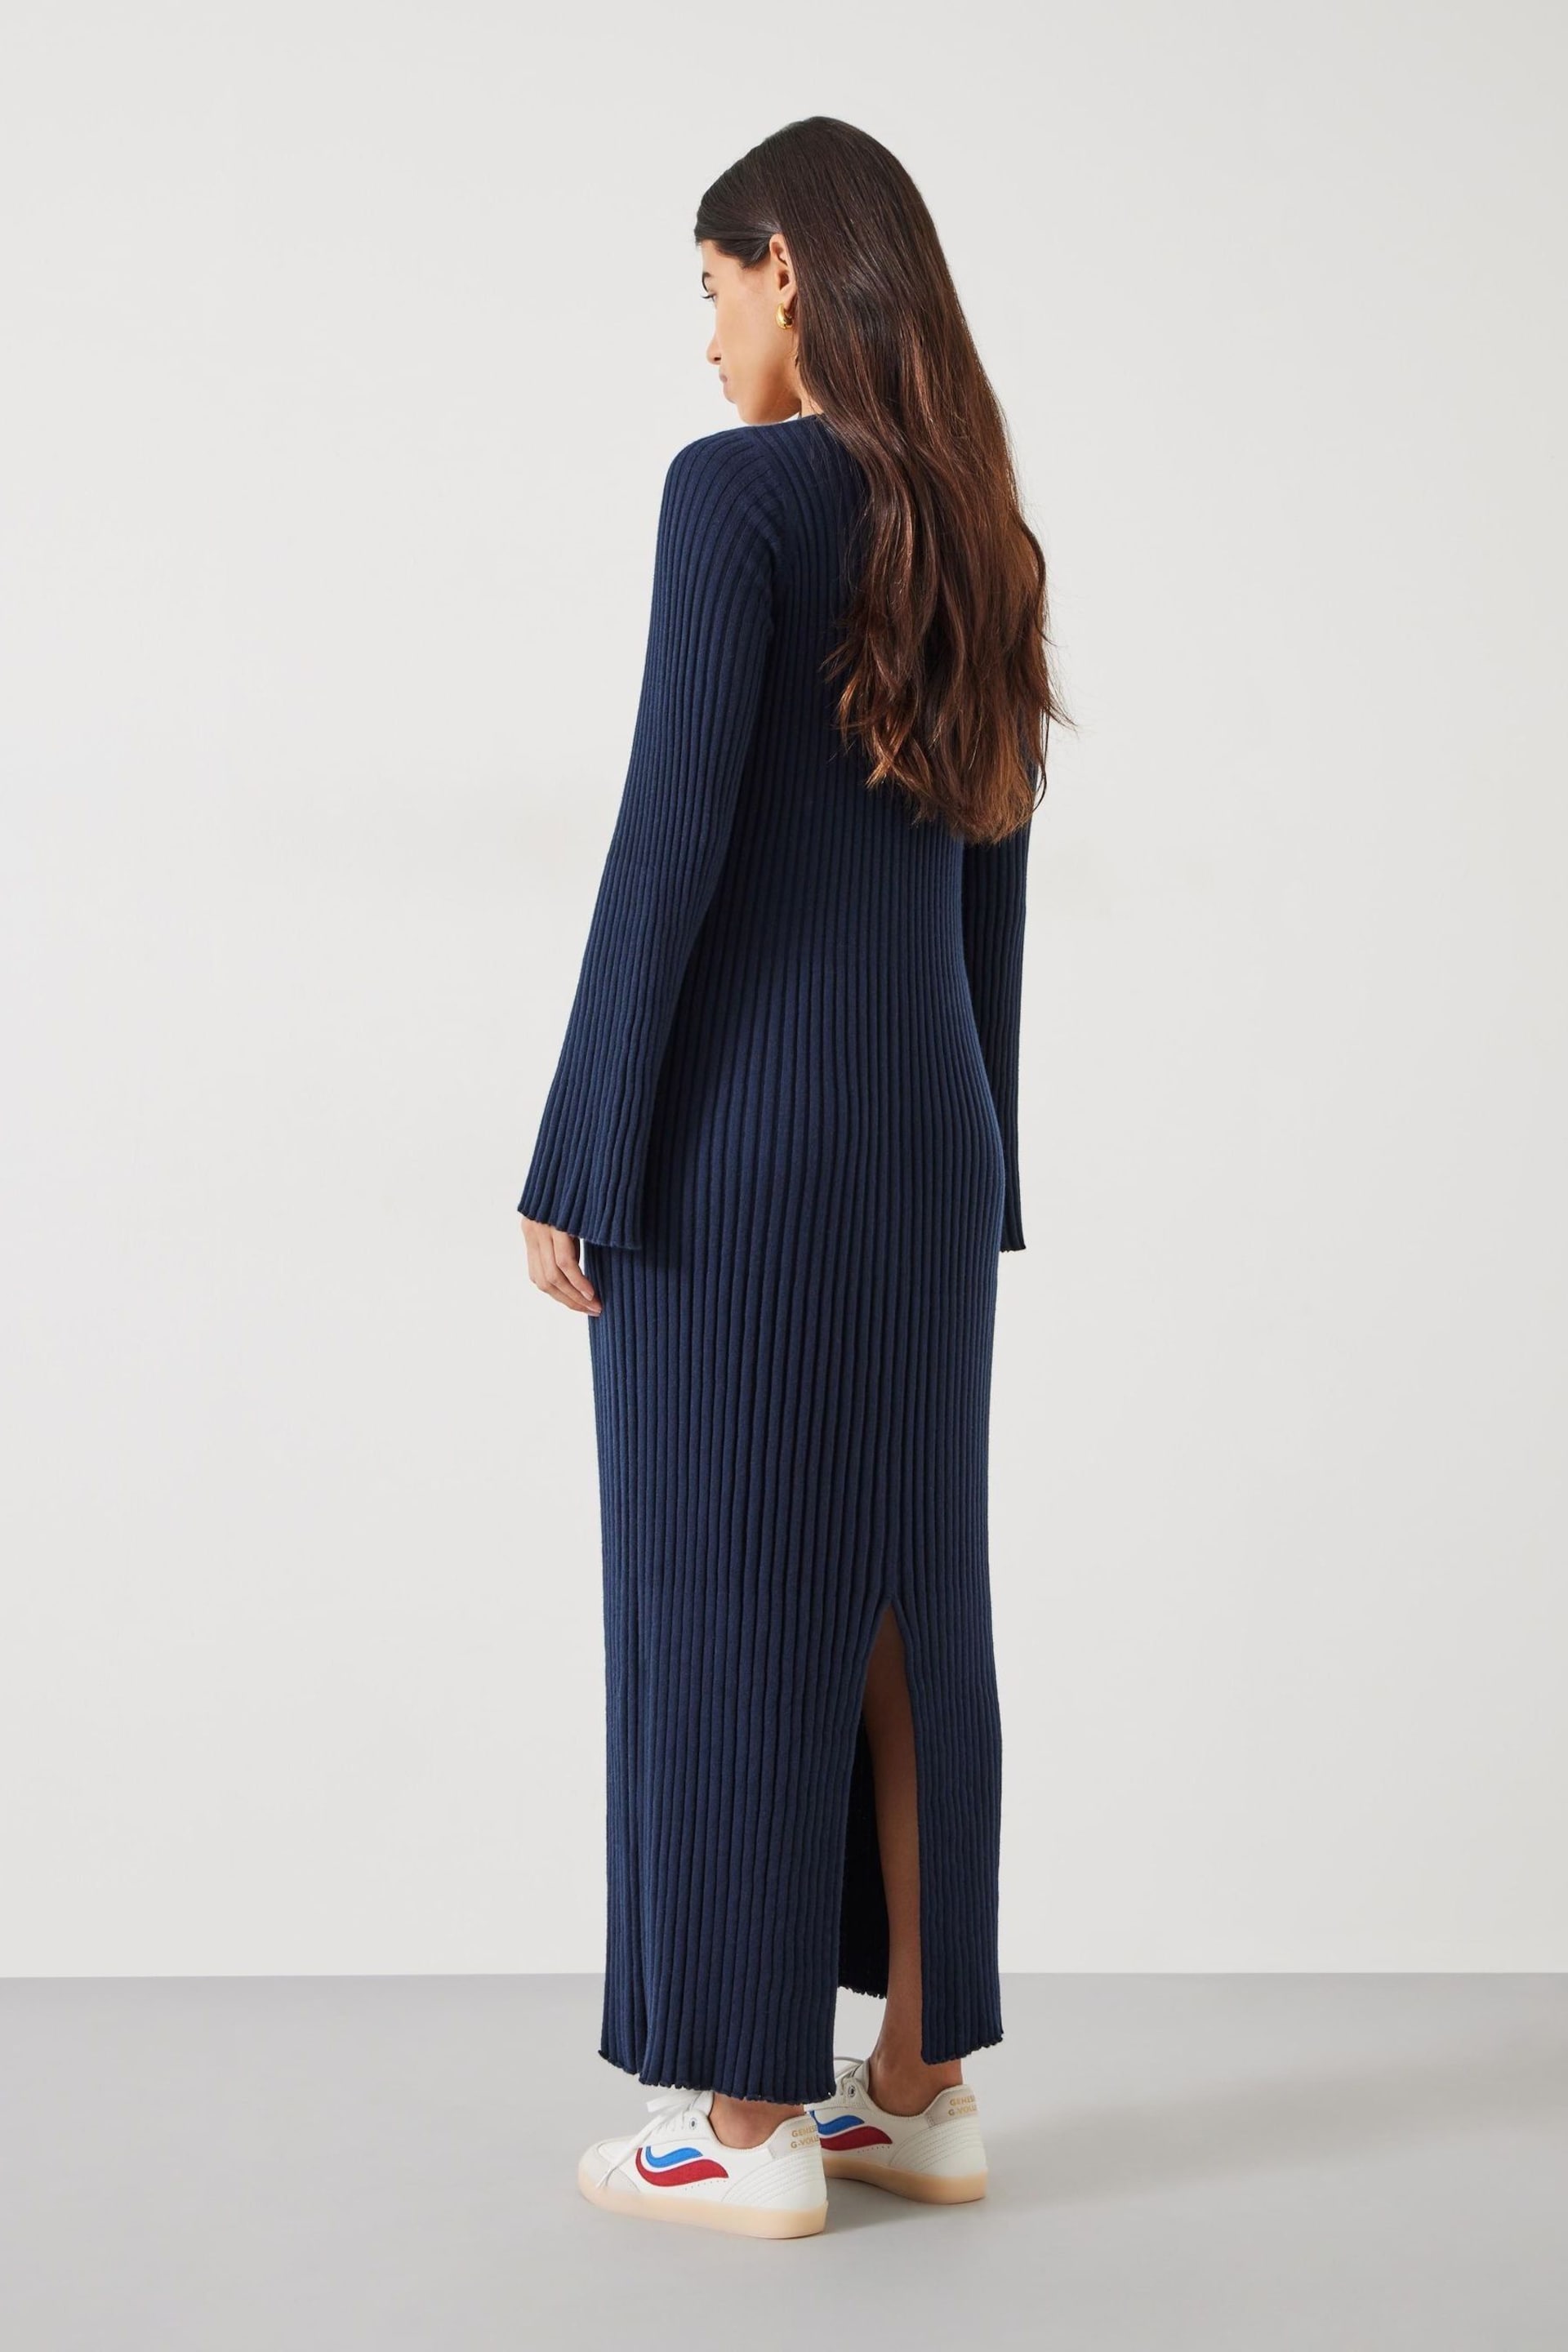 Hush Blue Penny Crew Neck Ribbed Knitted Dress - Image 2 of 5